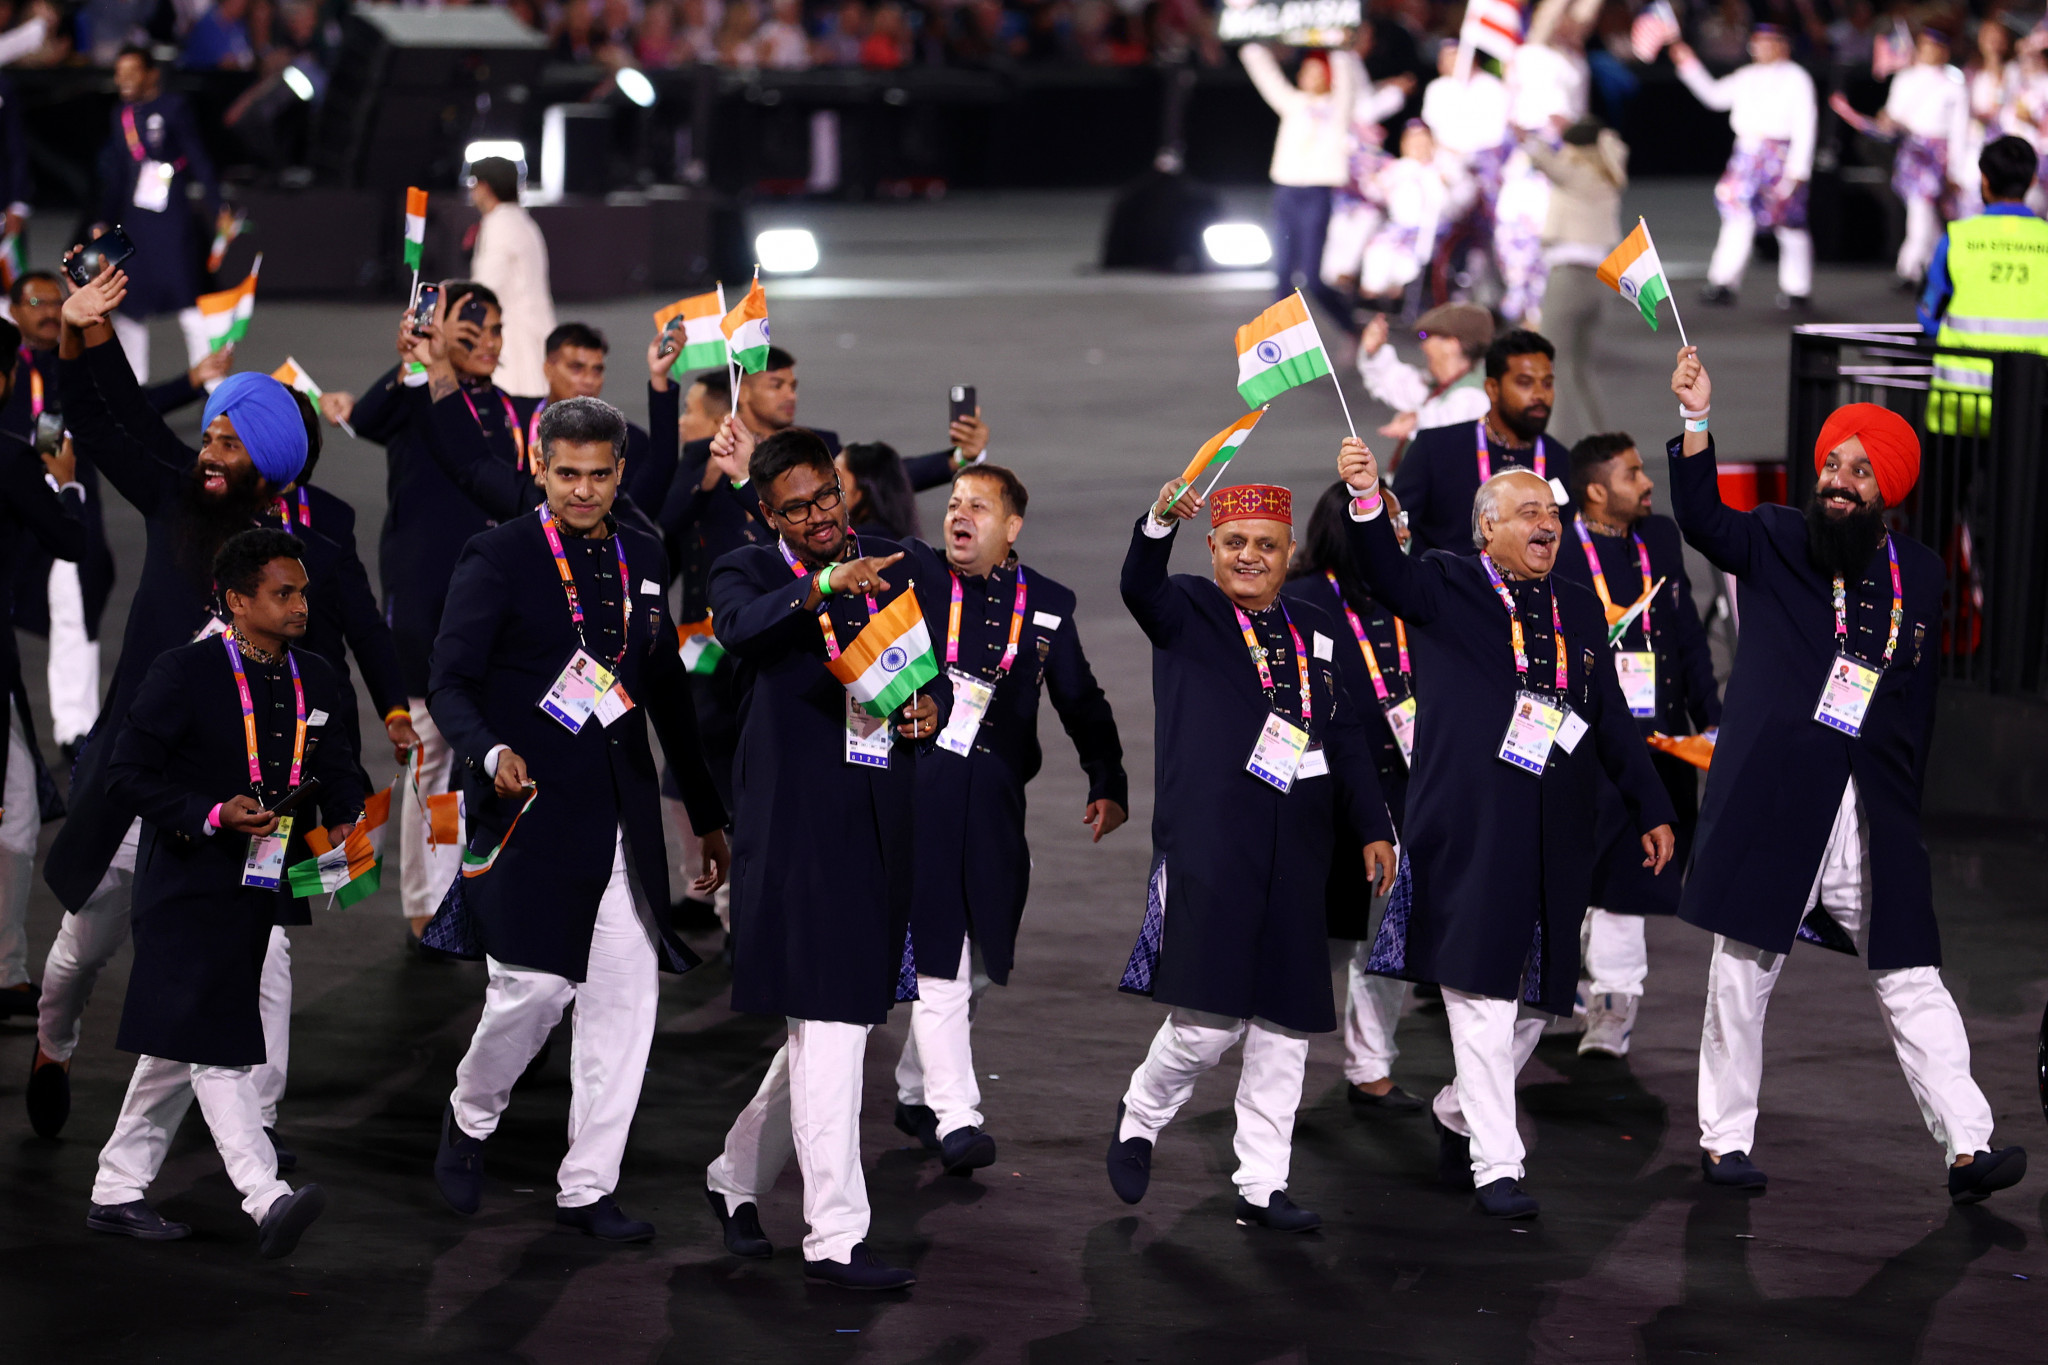 Indian athletes wore traditional coats for the Ceremony Getty Images